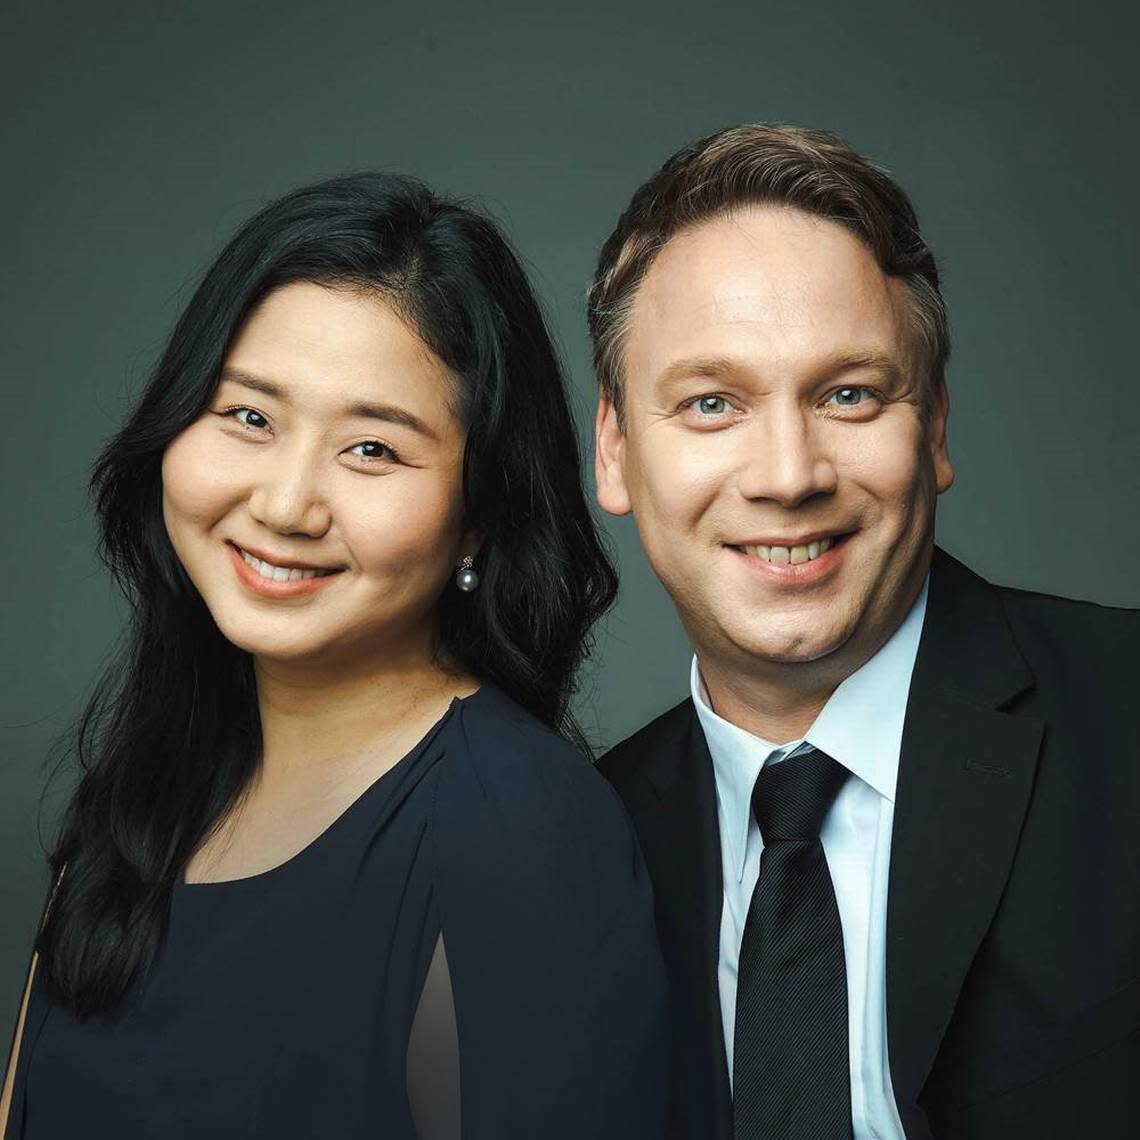 Dmitri Atapine and Hyeyeon Park are the co-artistic directors of the Friends of Chamber Music.